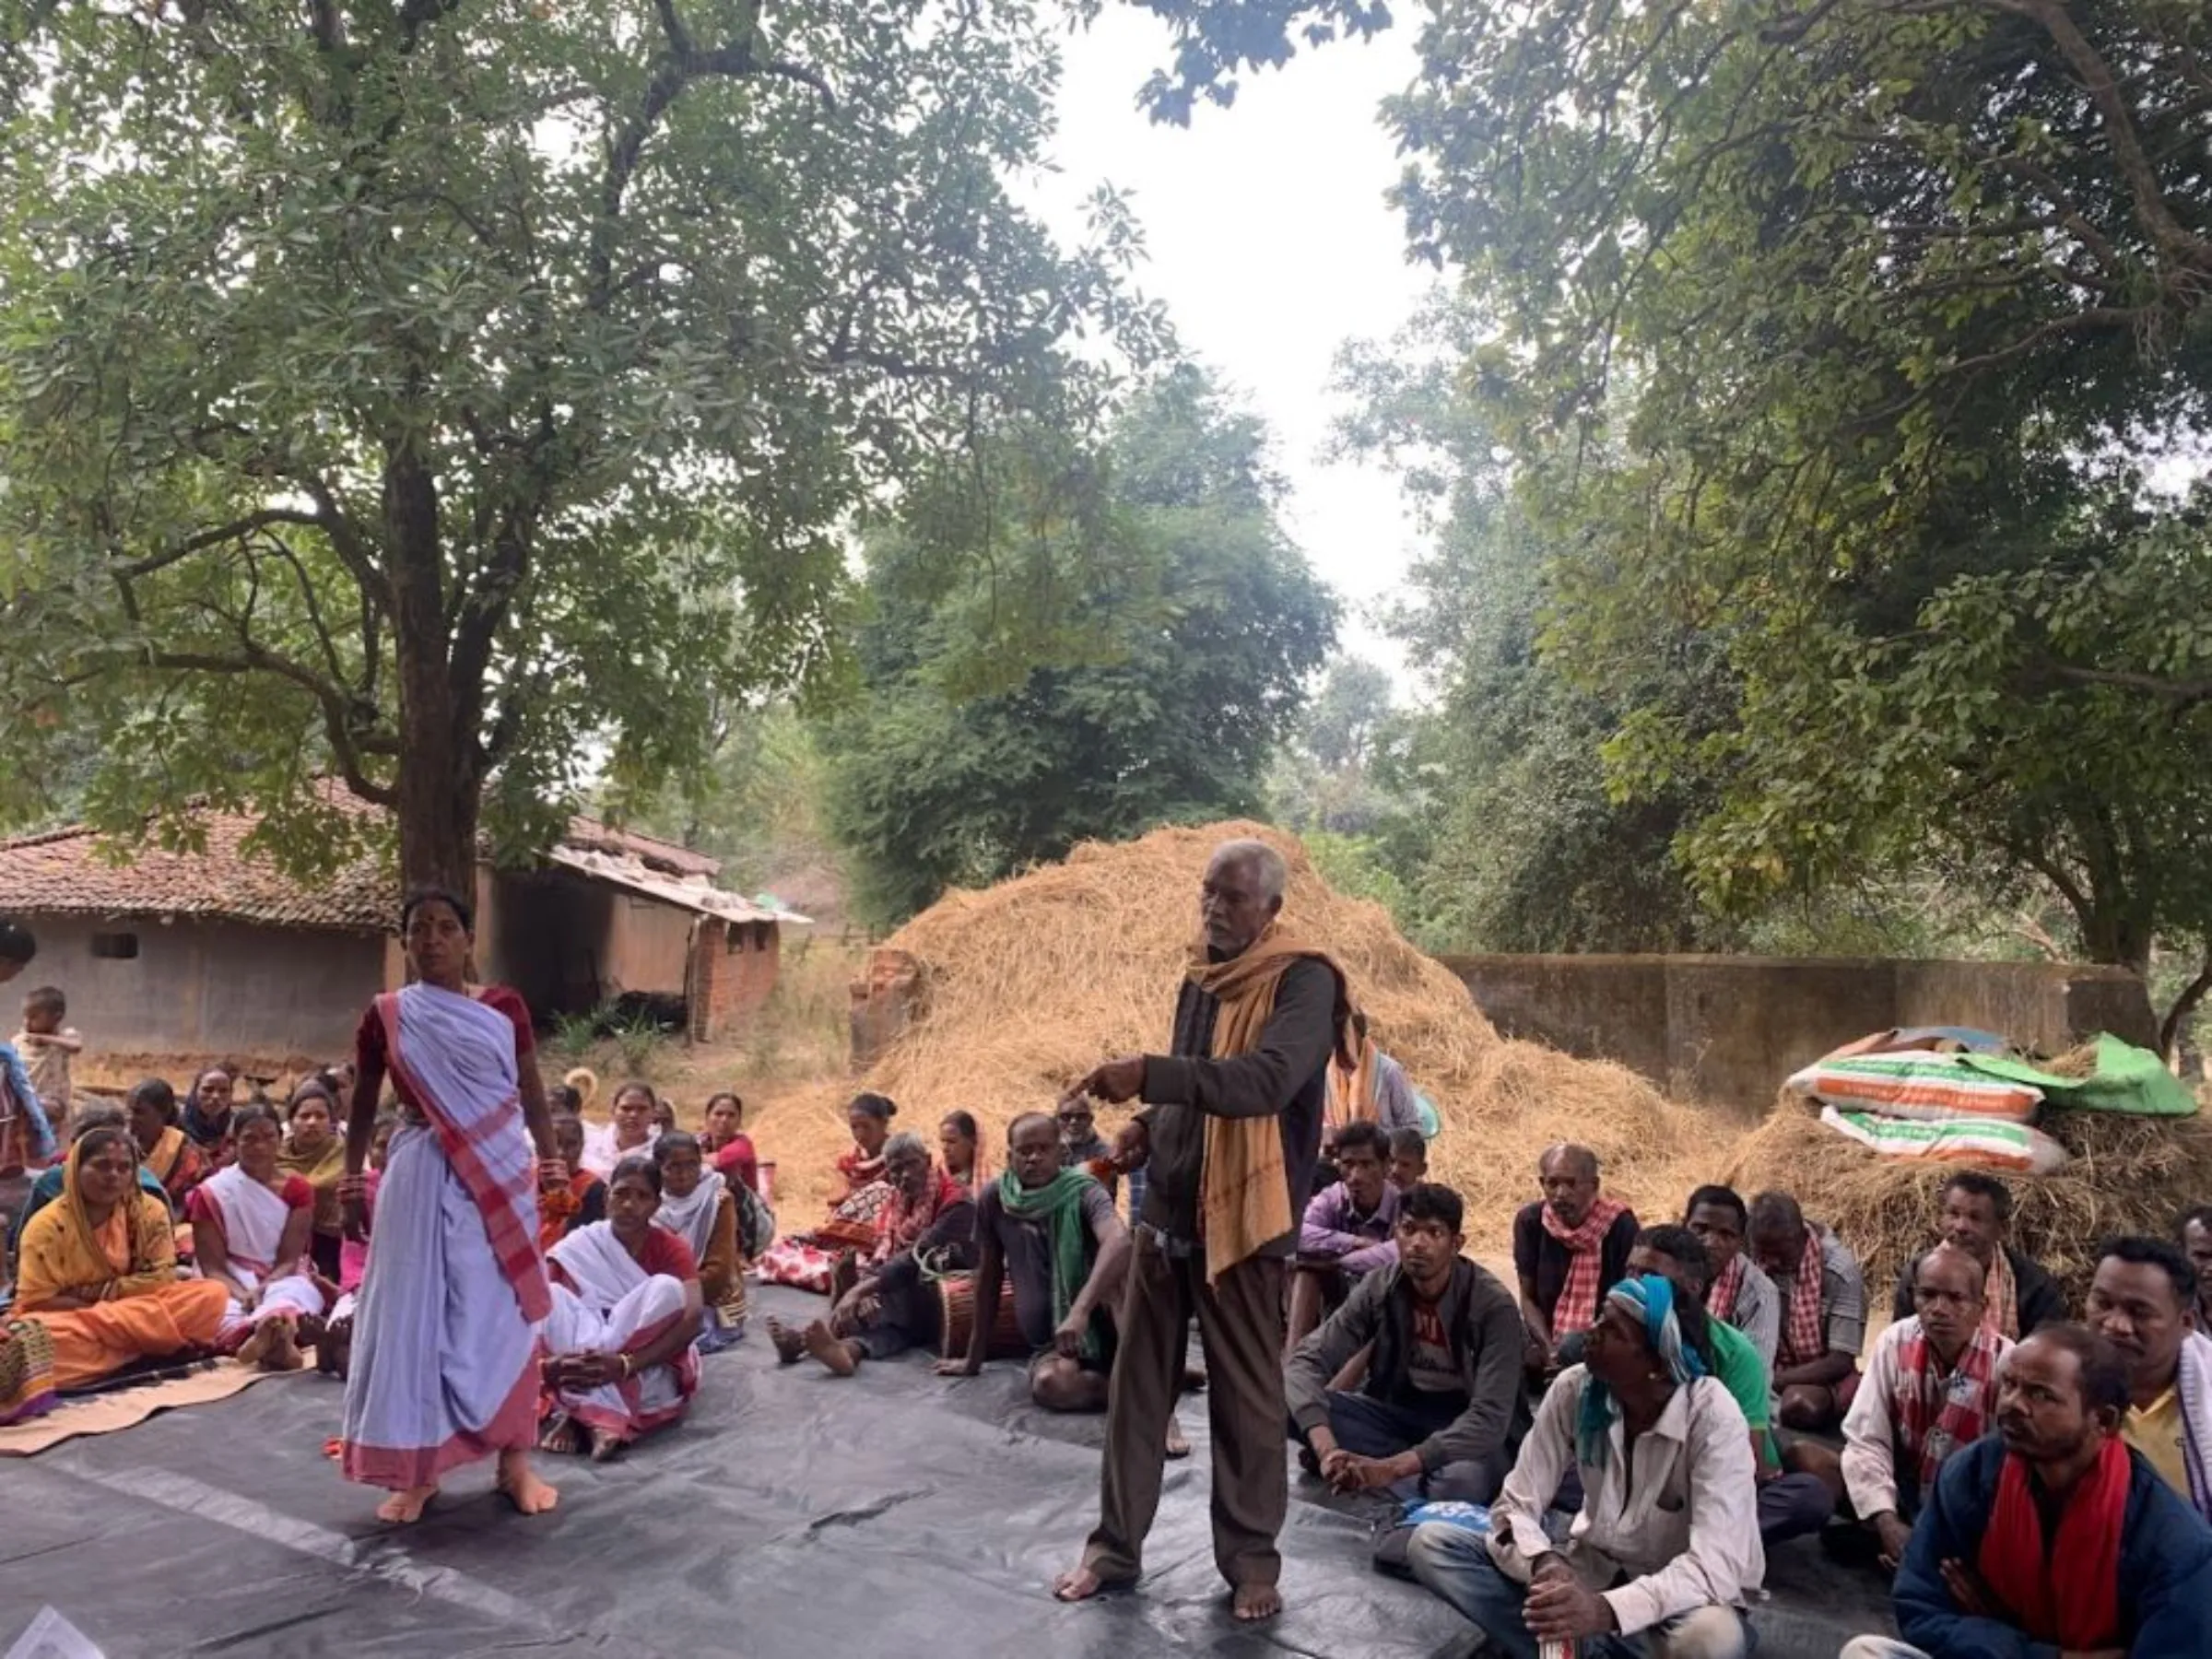 A village meeting in progress to discuss land rights near the Jamkhani reserved forest in eastern Odisha, India, December 10, 2022